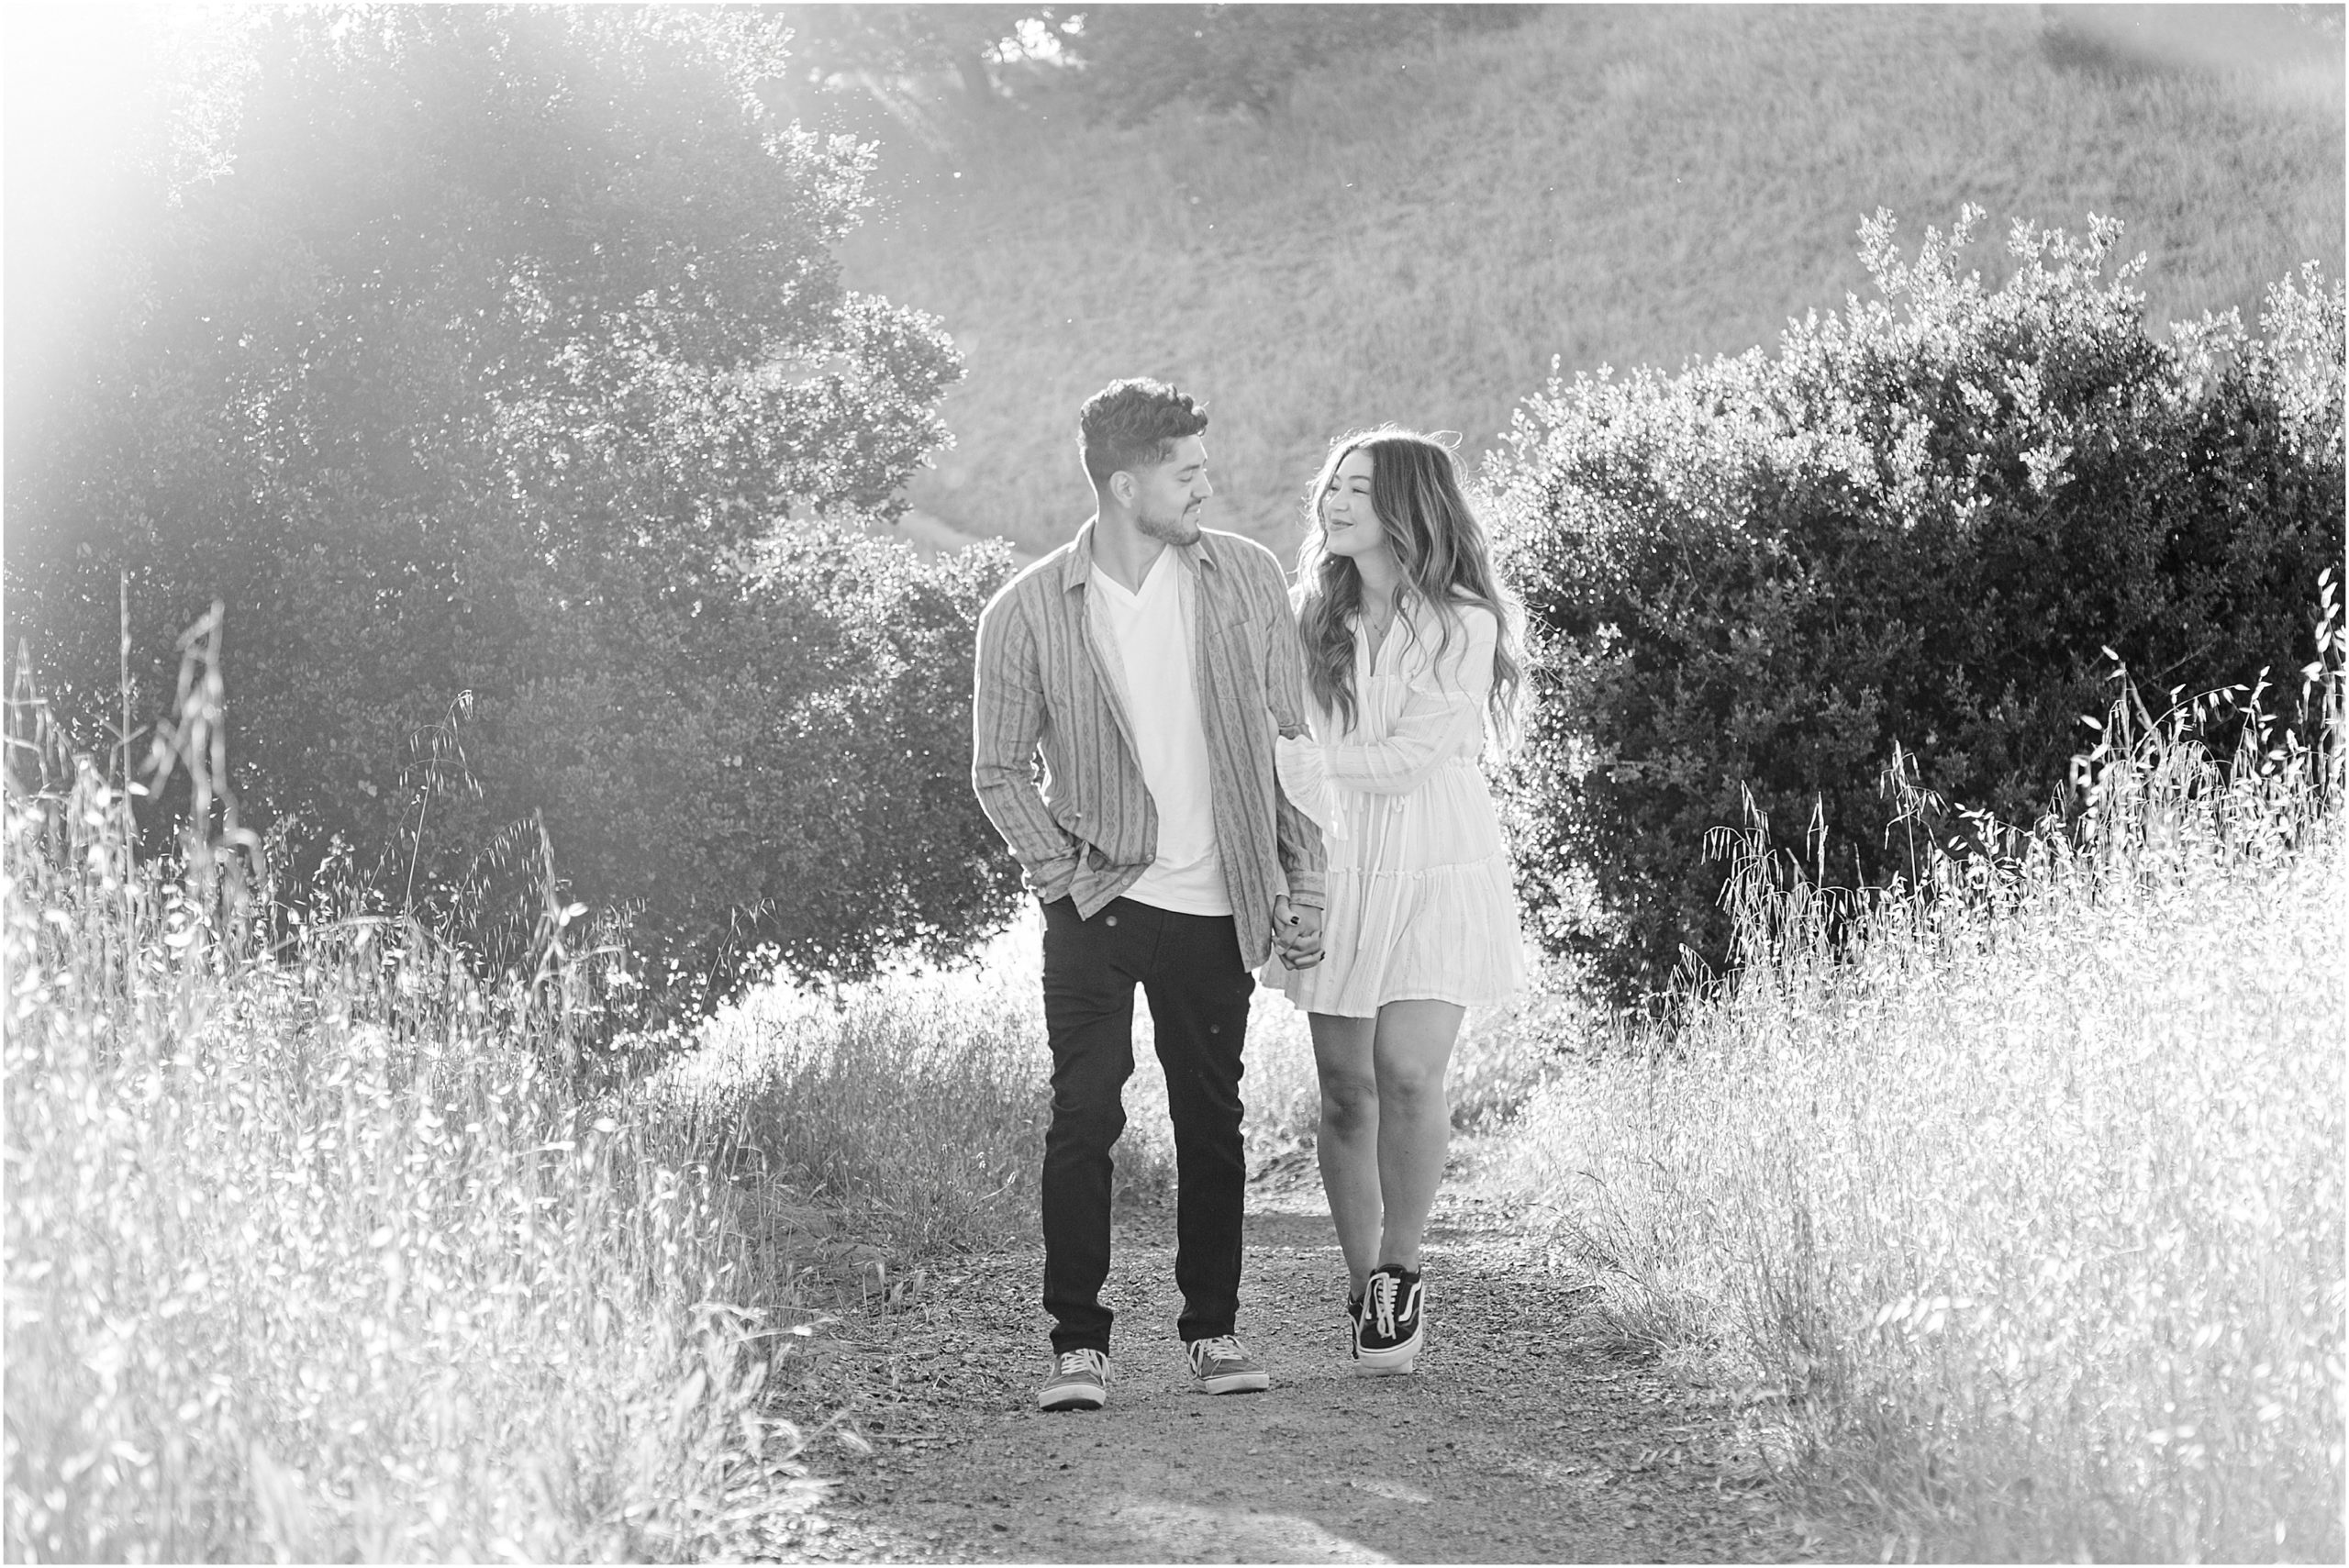 Amy Jordan Photography at a couples session at Helen Putnam Regional park